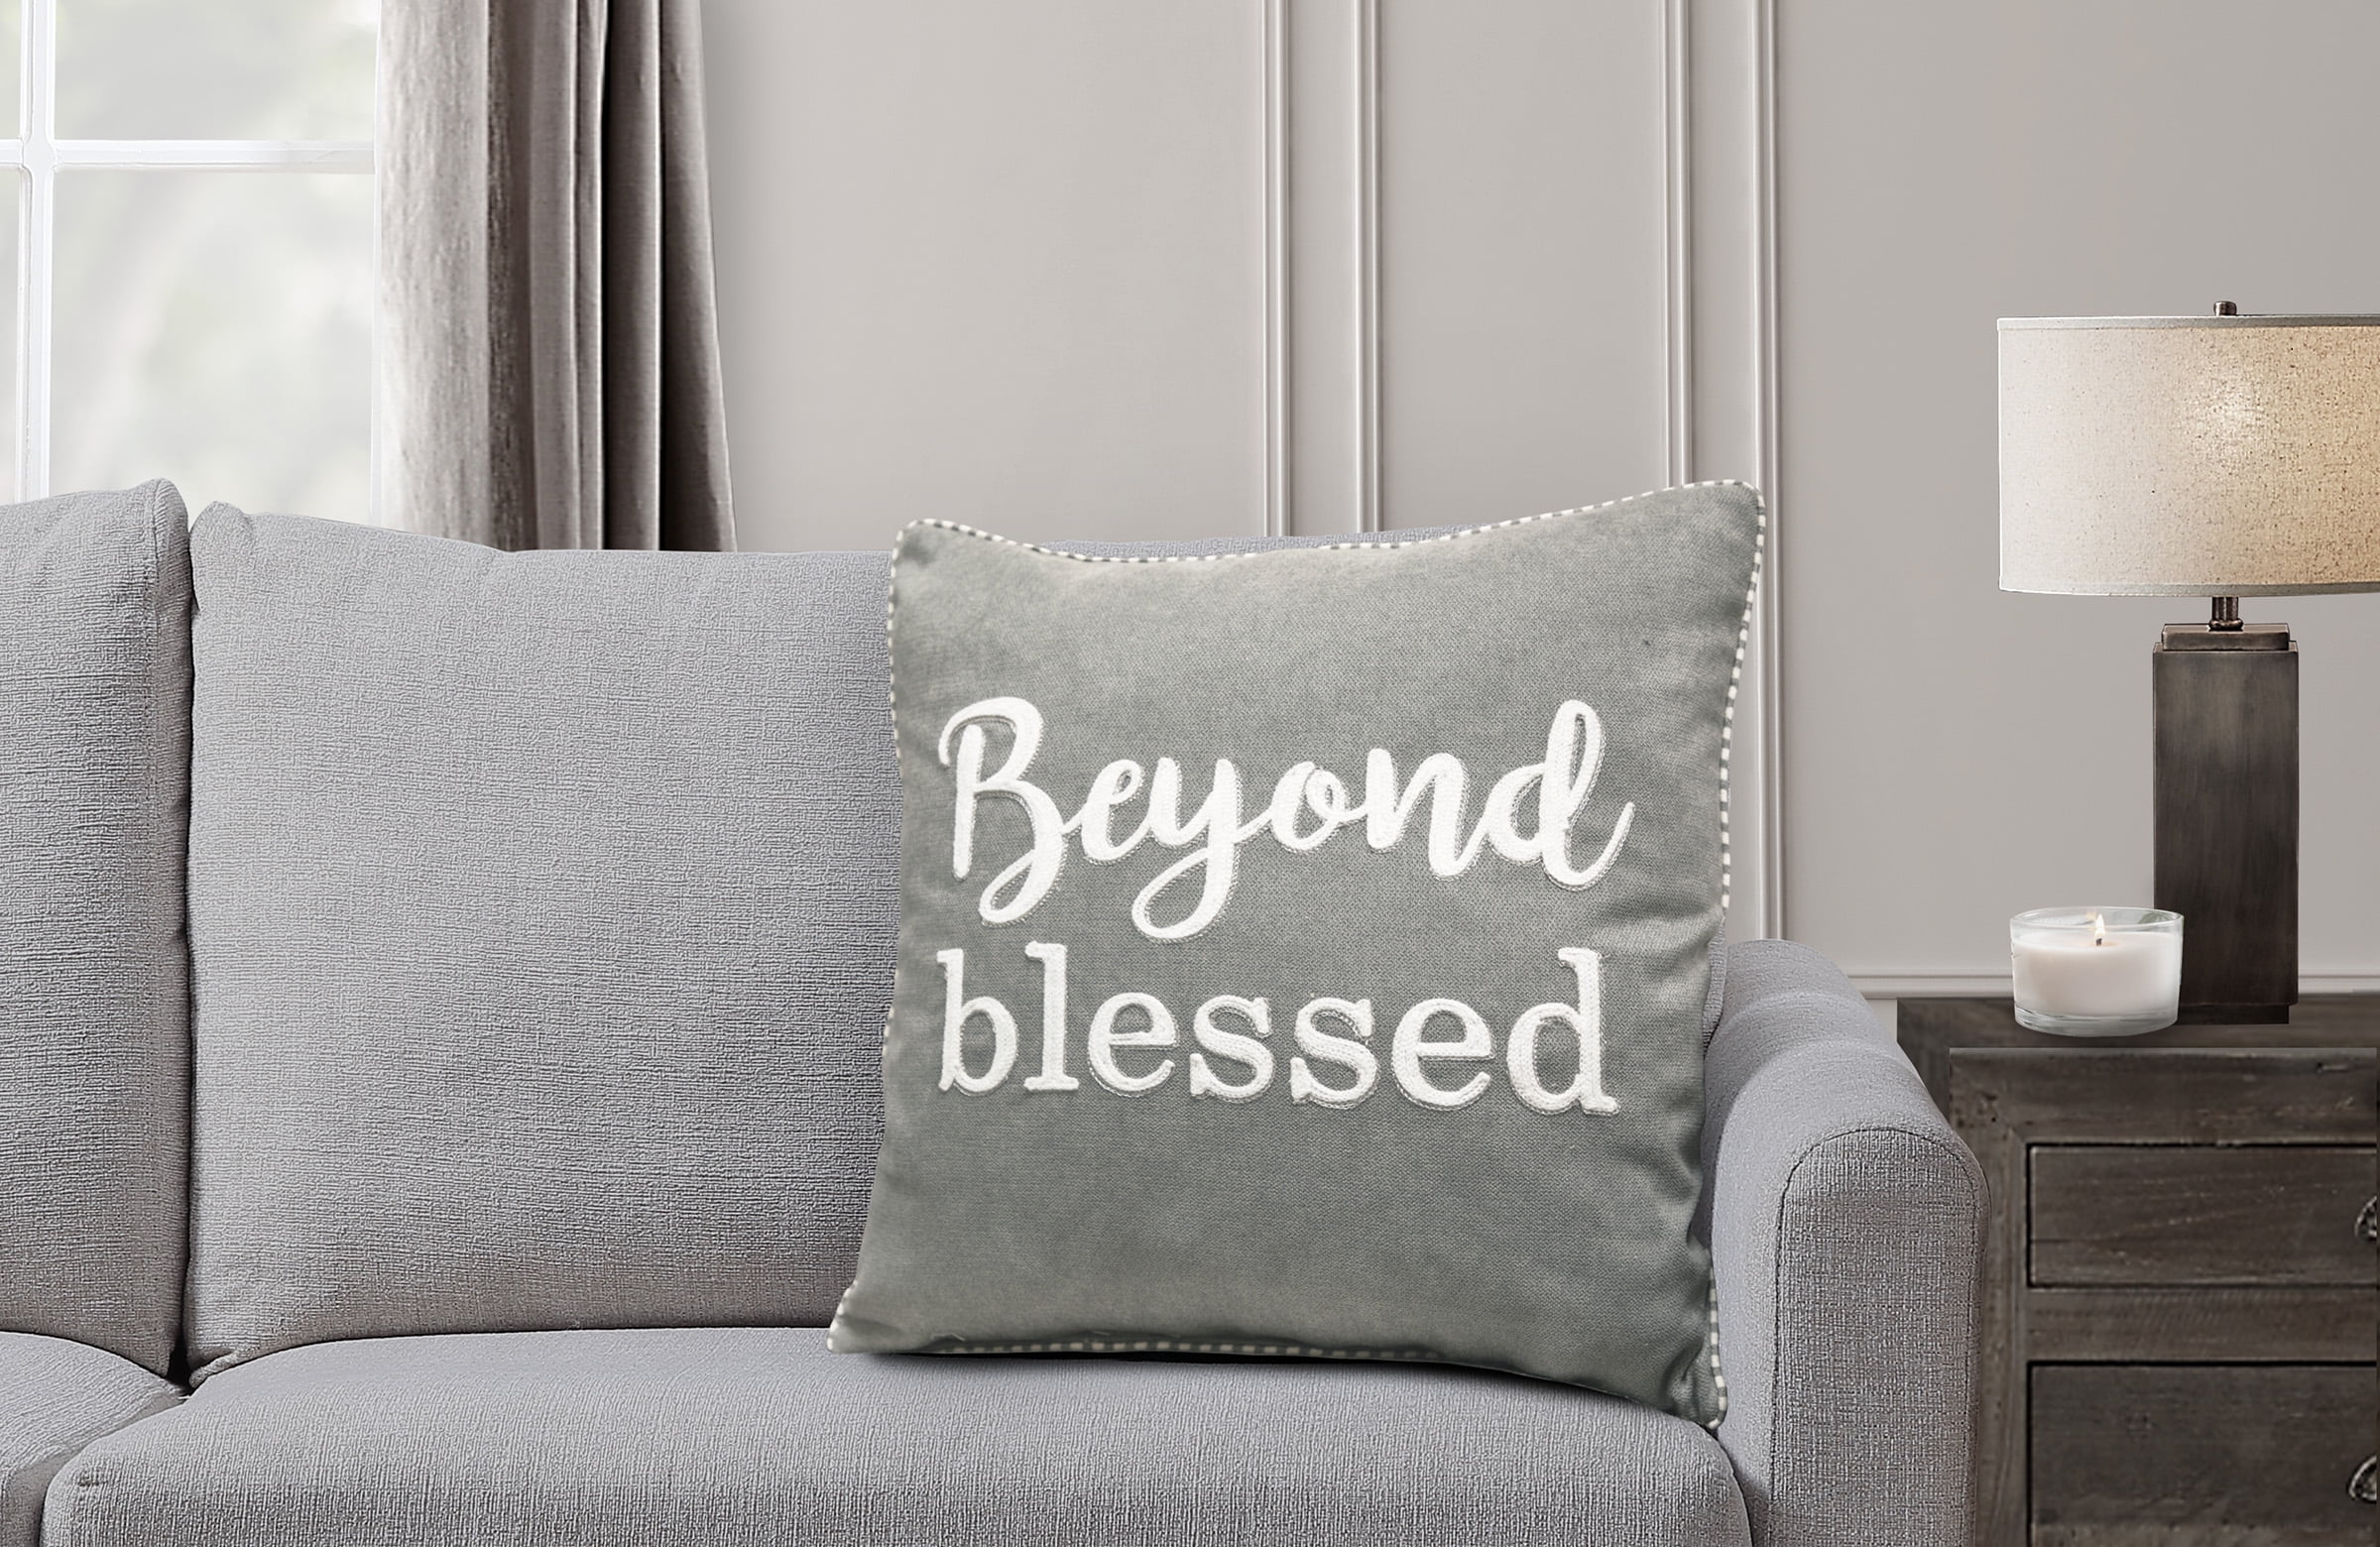 Mainstays Decorative Throw Pillow, Beyond Blessed Sentiment